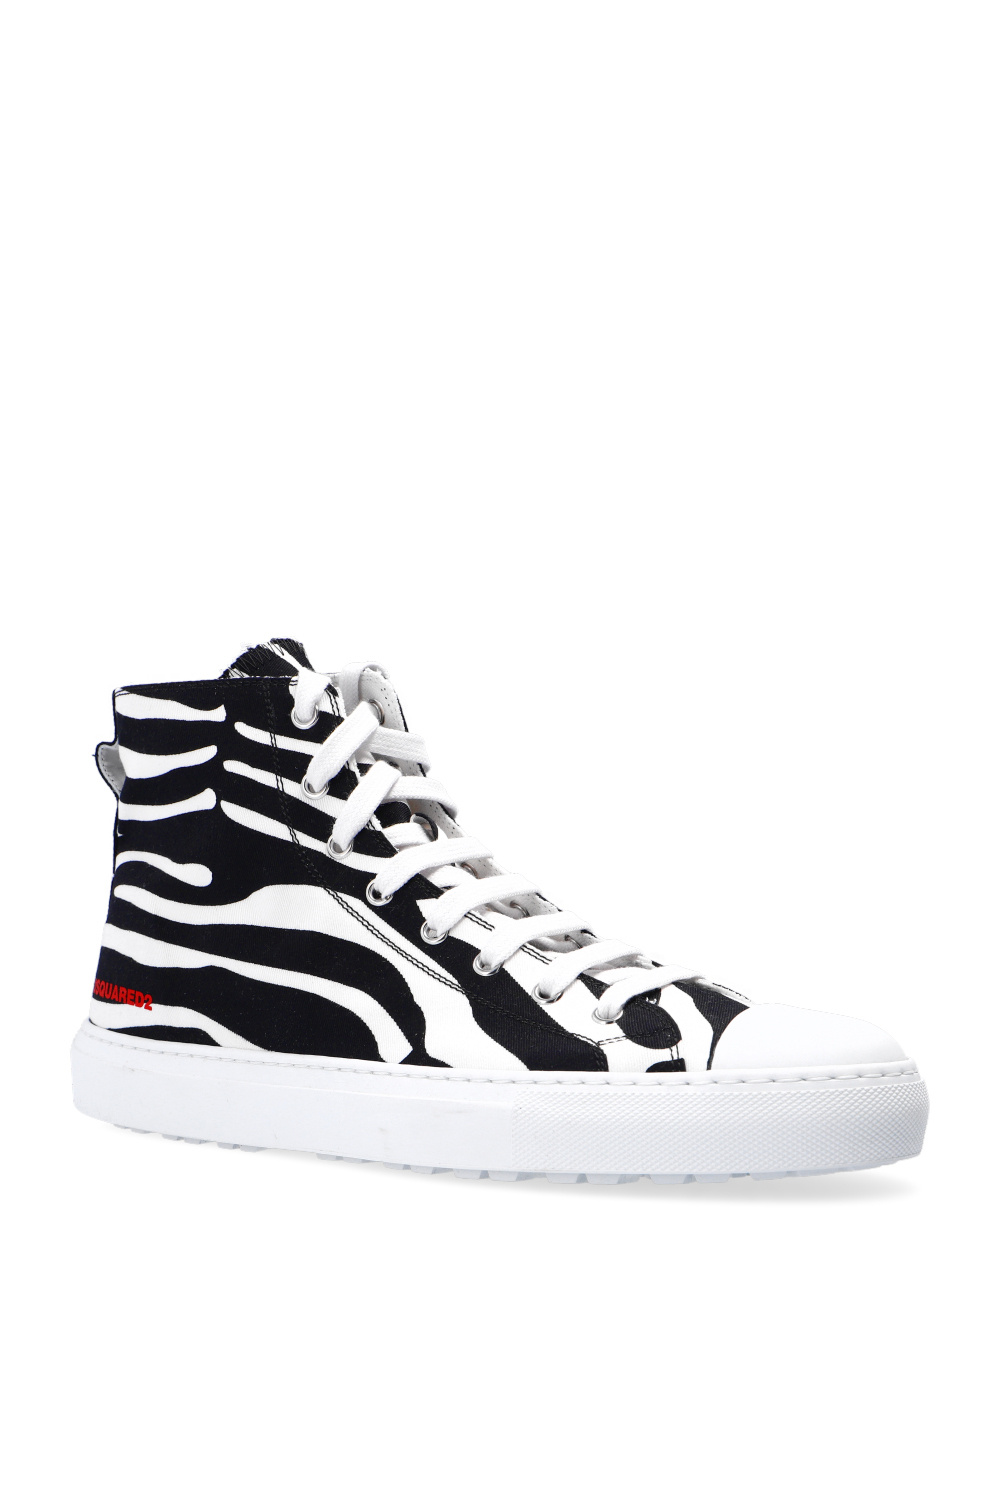 Dsquared2 ‘San Diego’ sneakers